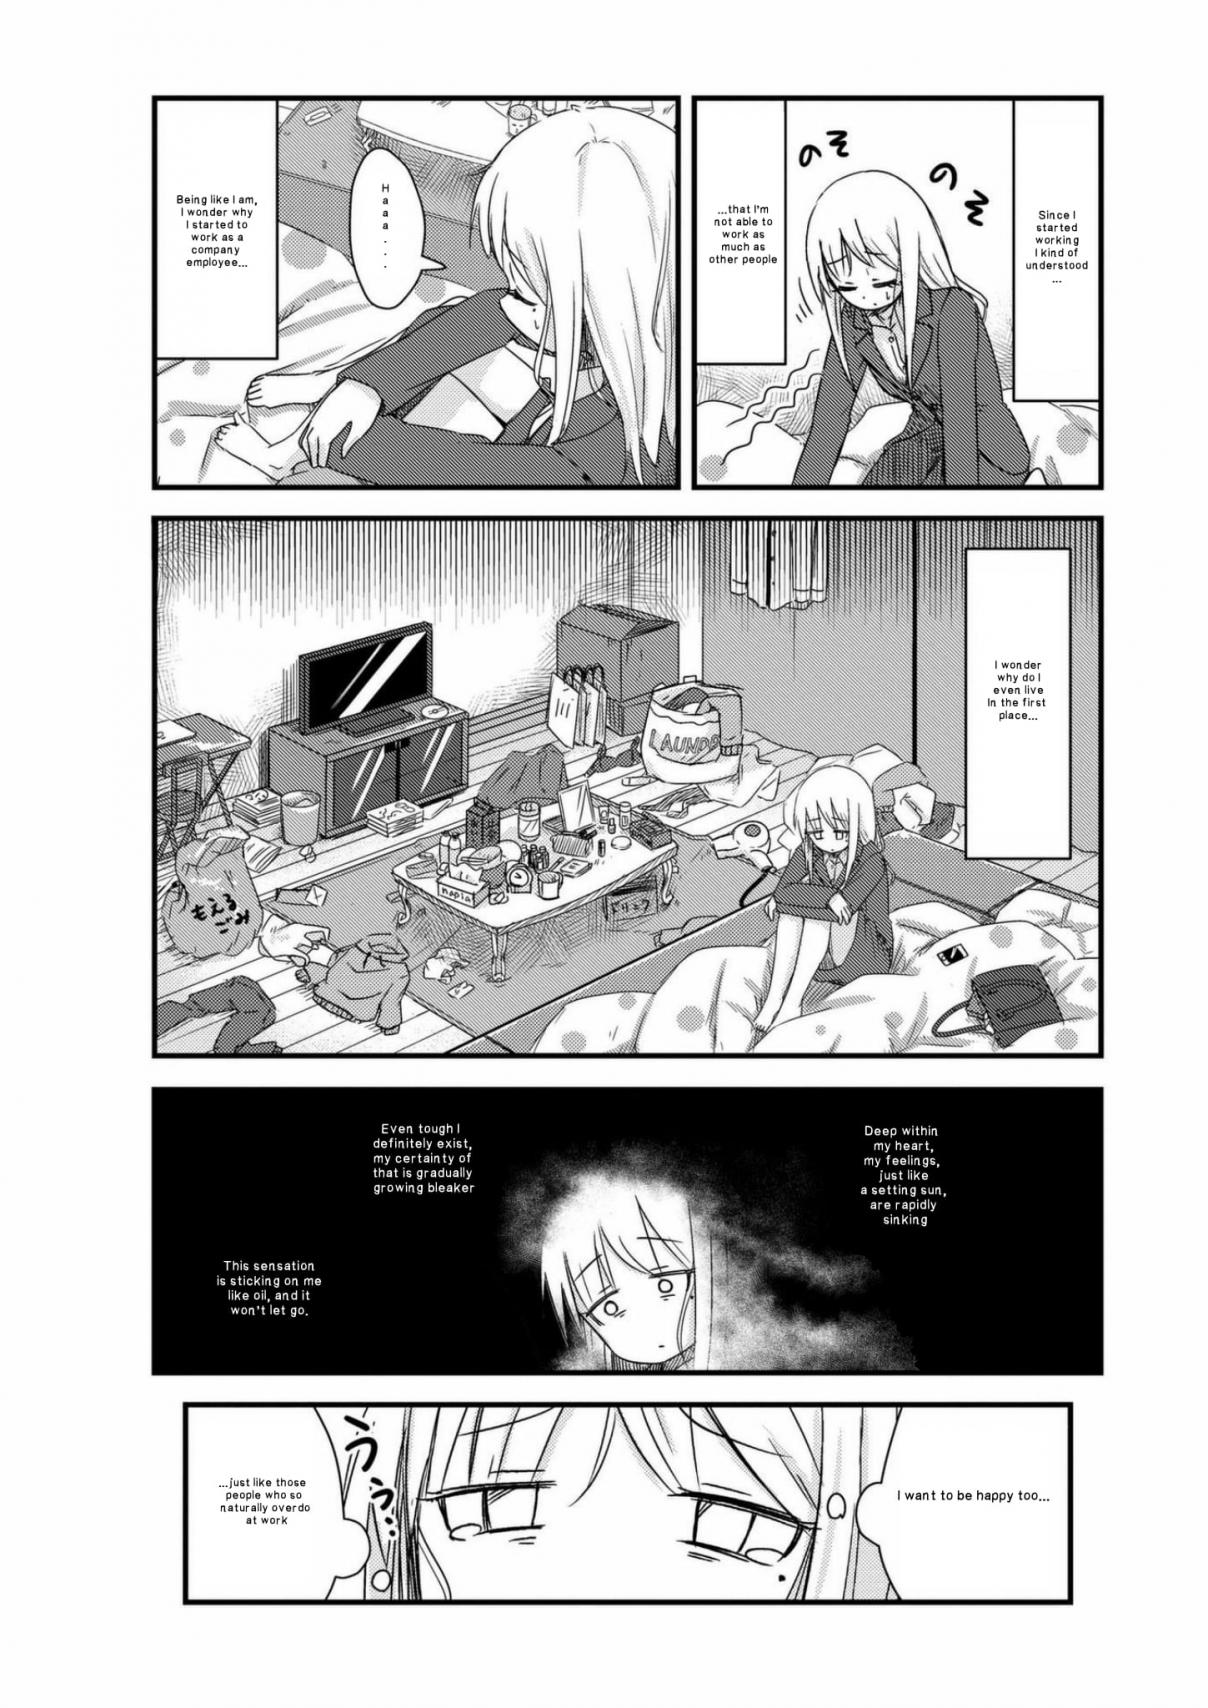 She doesn't know why she lives. Vol. 2 Ch. 14 Worst Office Lady